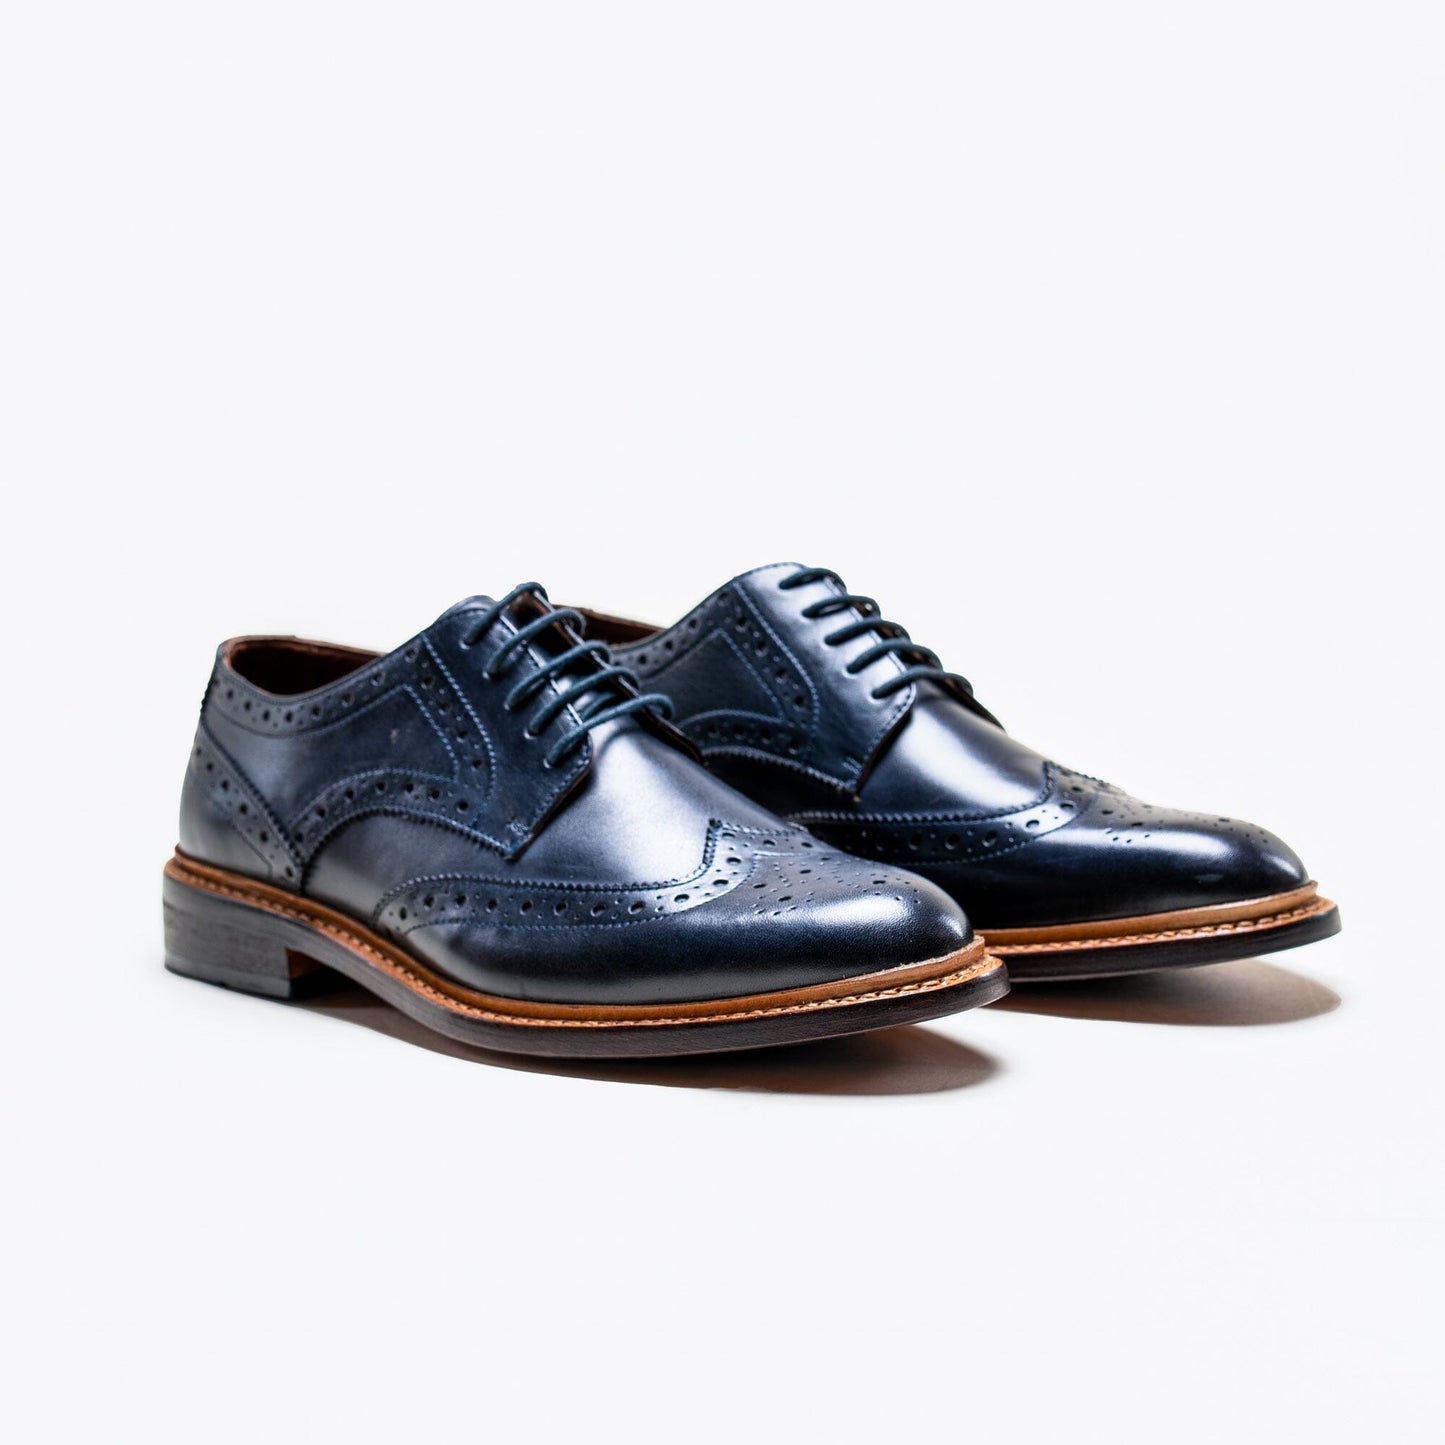 Navy Leather Brogue Shoes - STOCK CLEARANCE - Shoes Sale - 